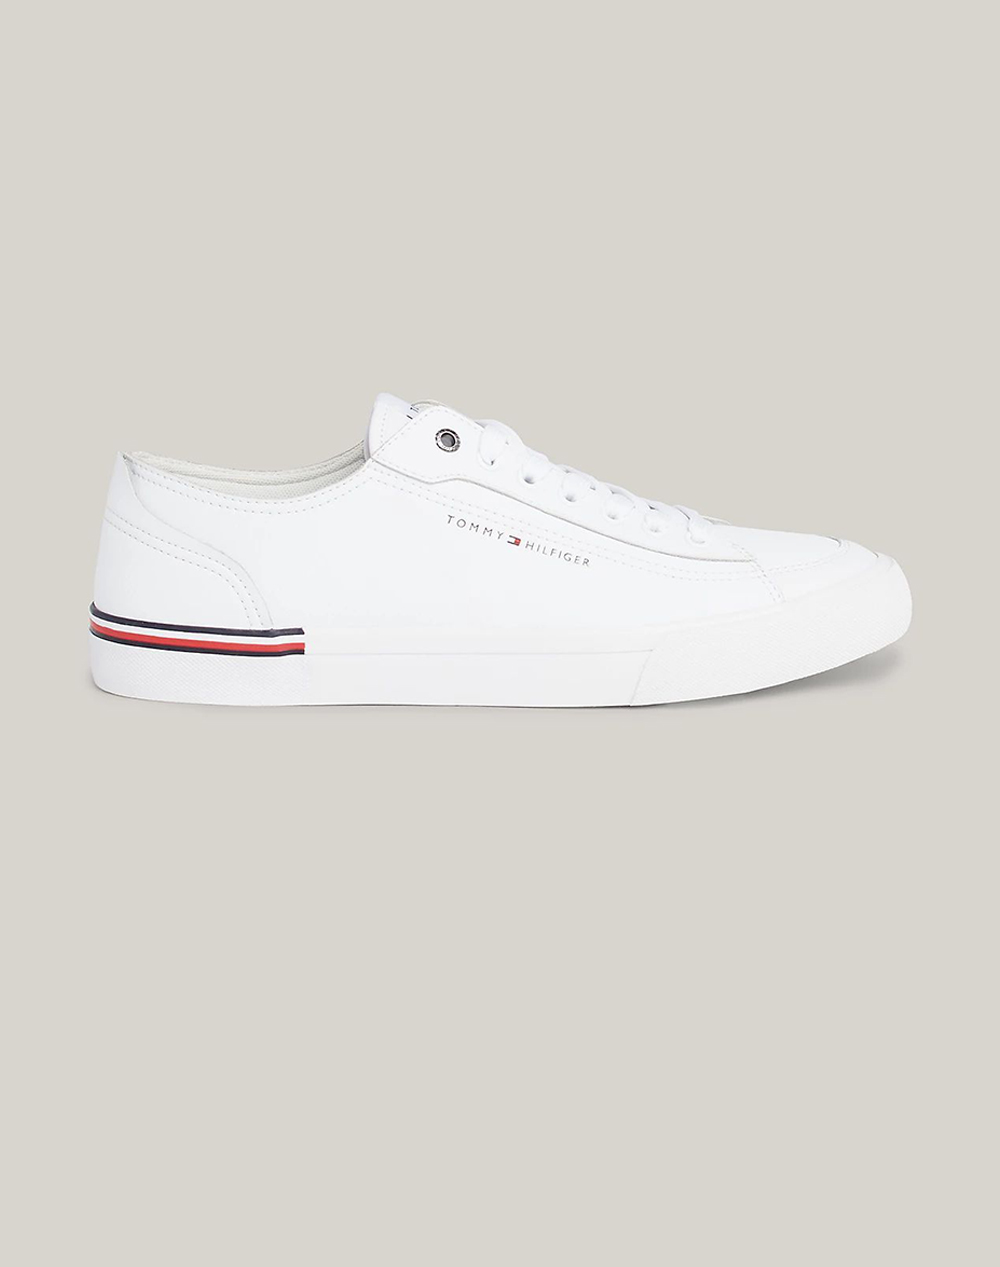 TOMMY HILFIGER CORPORATE VULC LEATHER FM0FM04953-YBS White 3820ATOMM6070223_10778